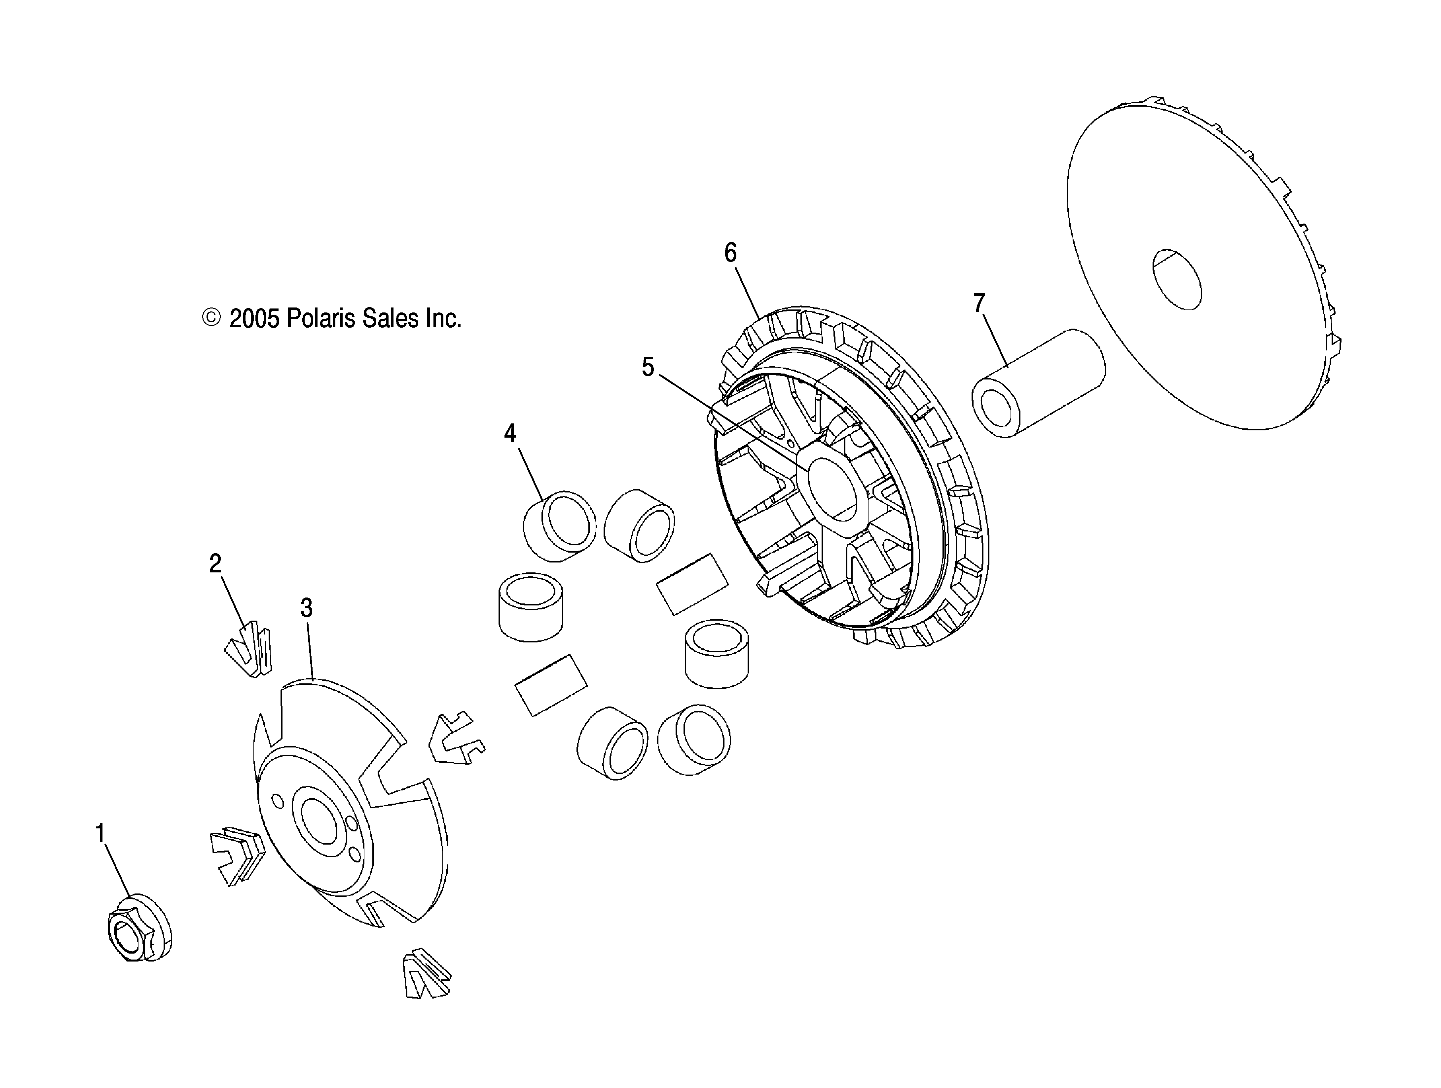 Part Number : 2875563 T-TOOL CLUTCH